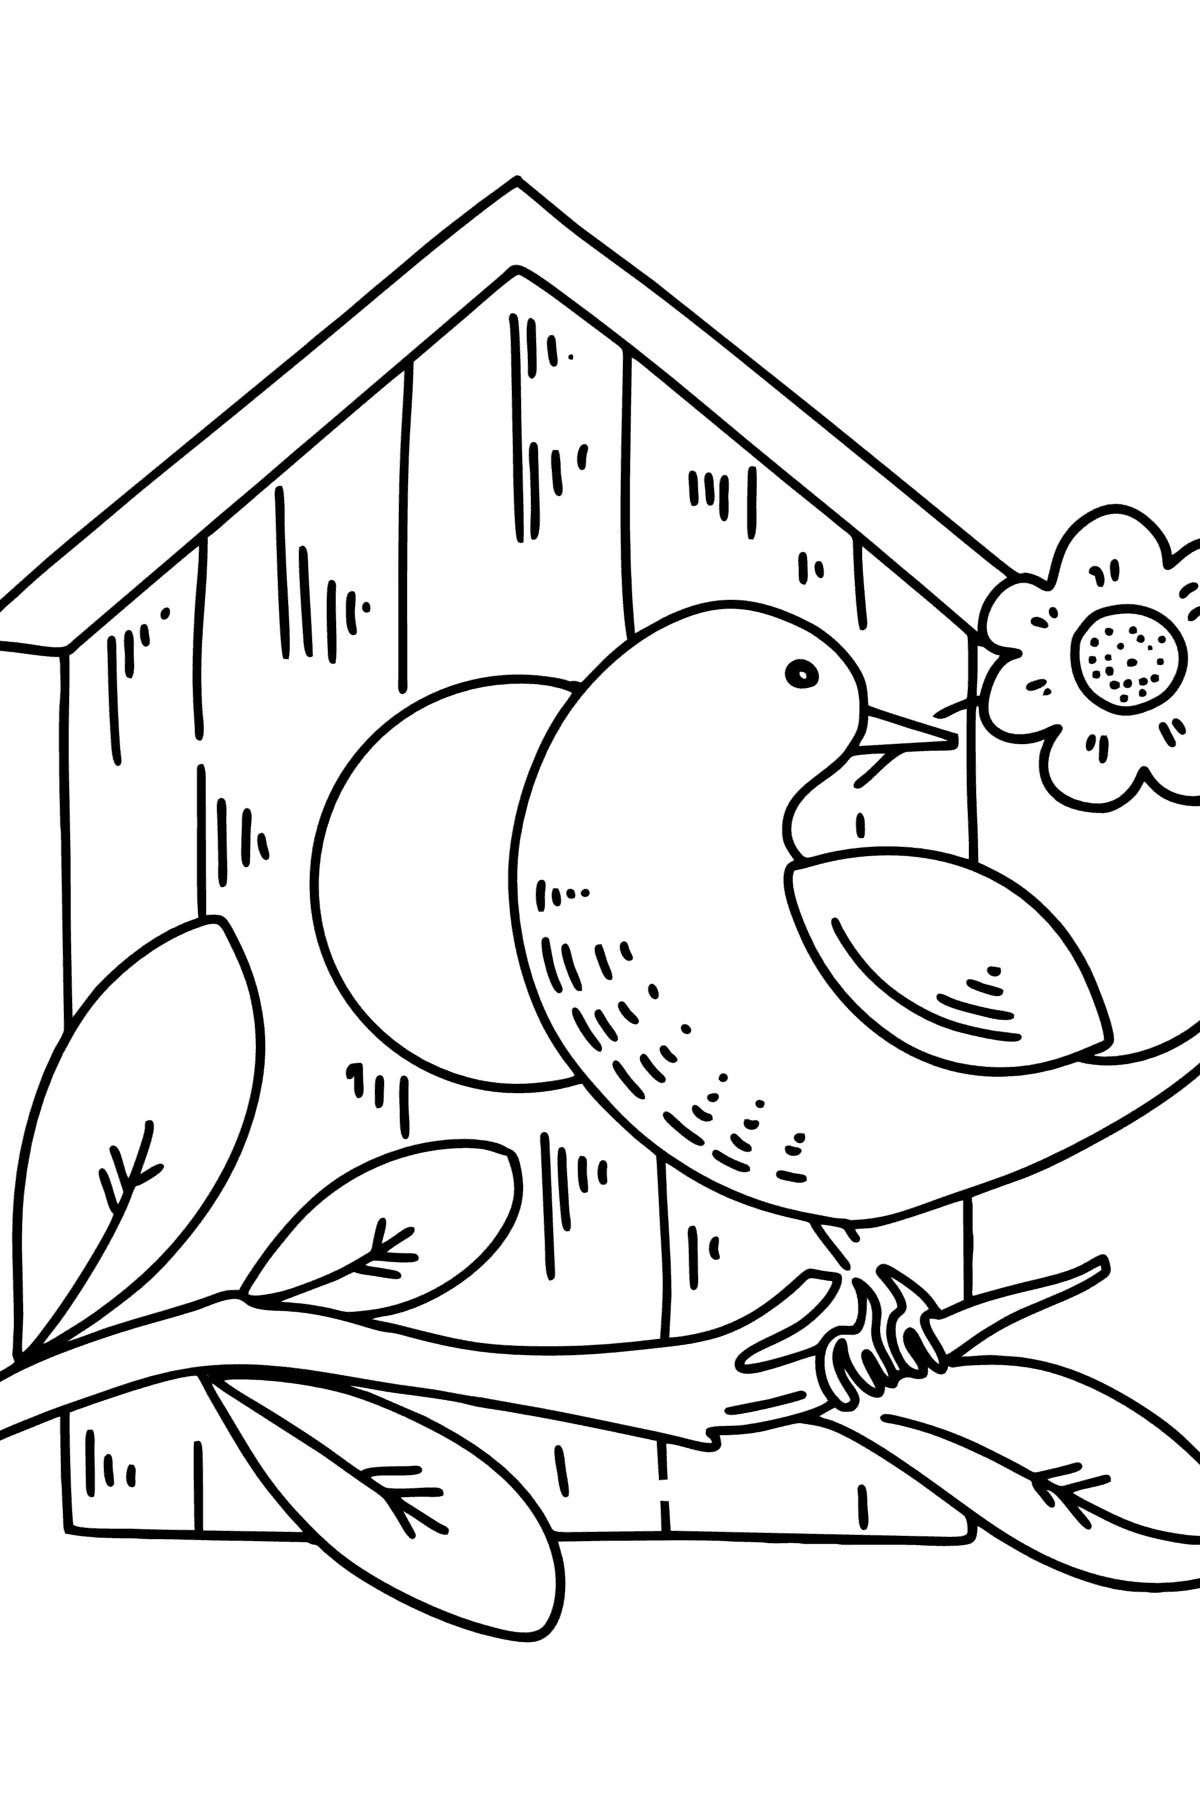 Starling at the Birdhouse coloring page - Coloring Pages for Kids